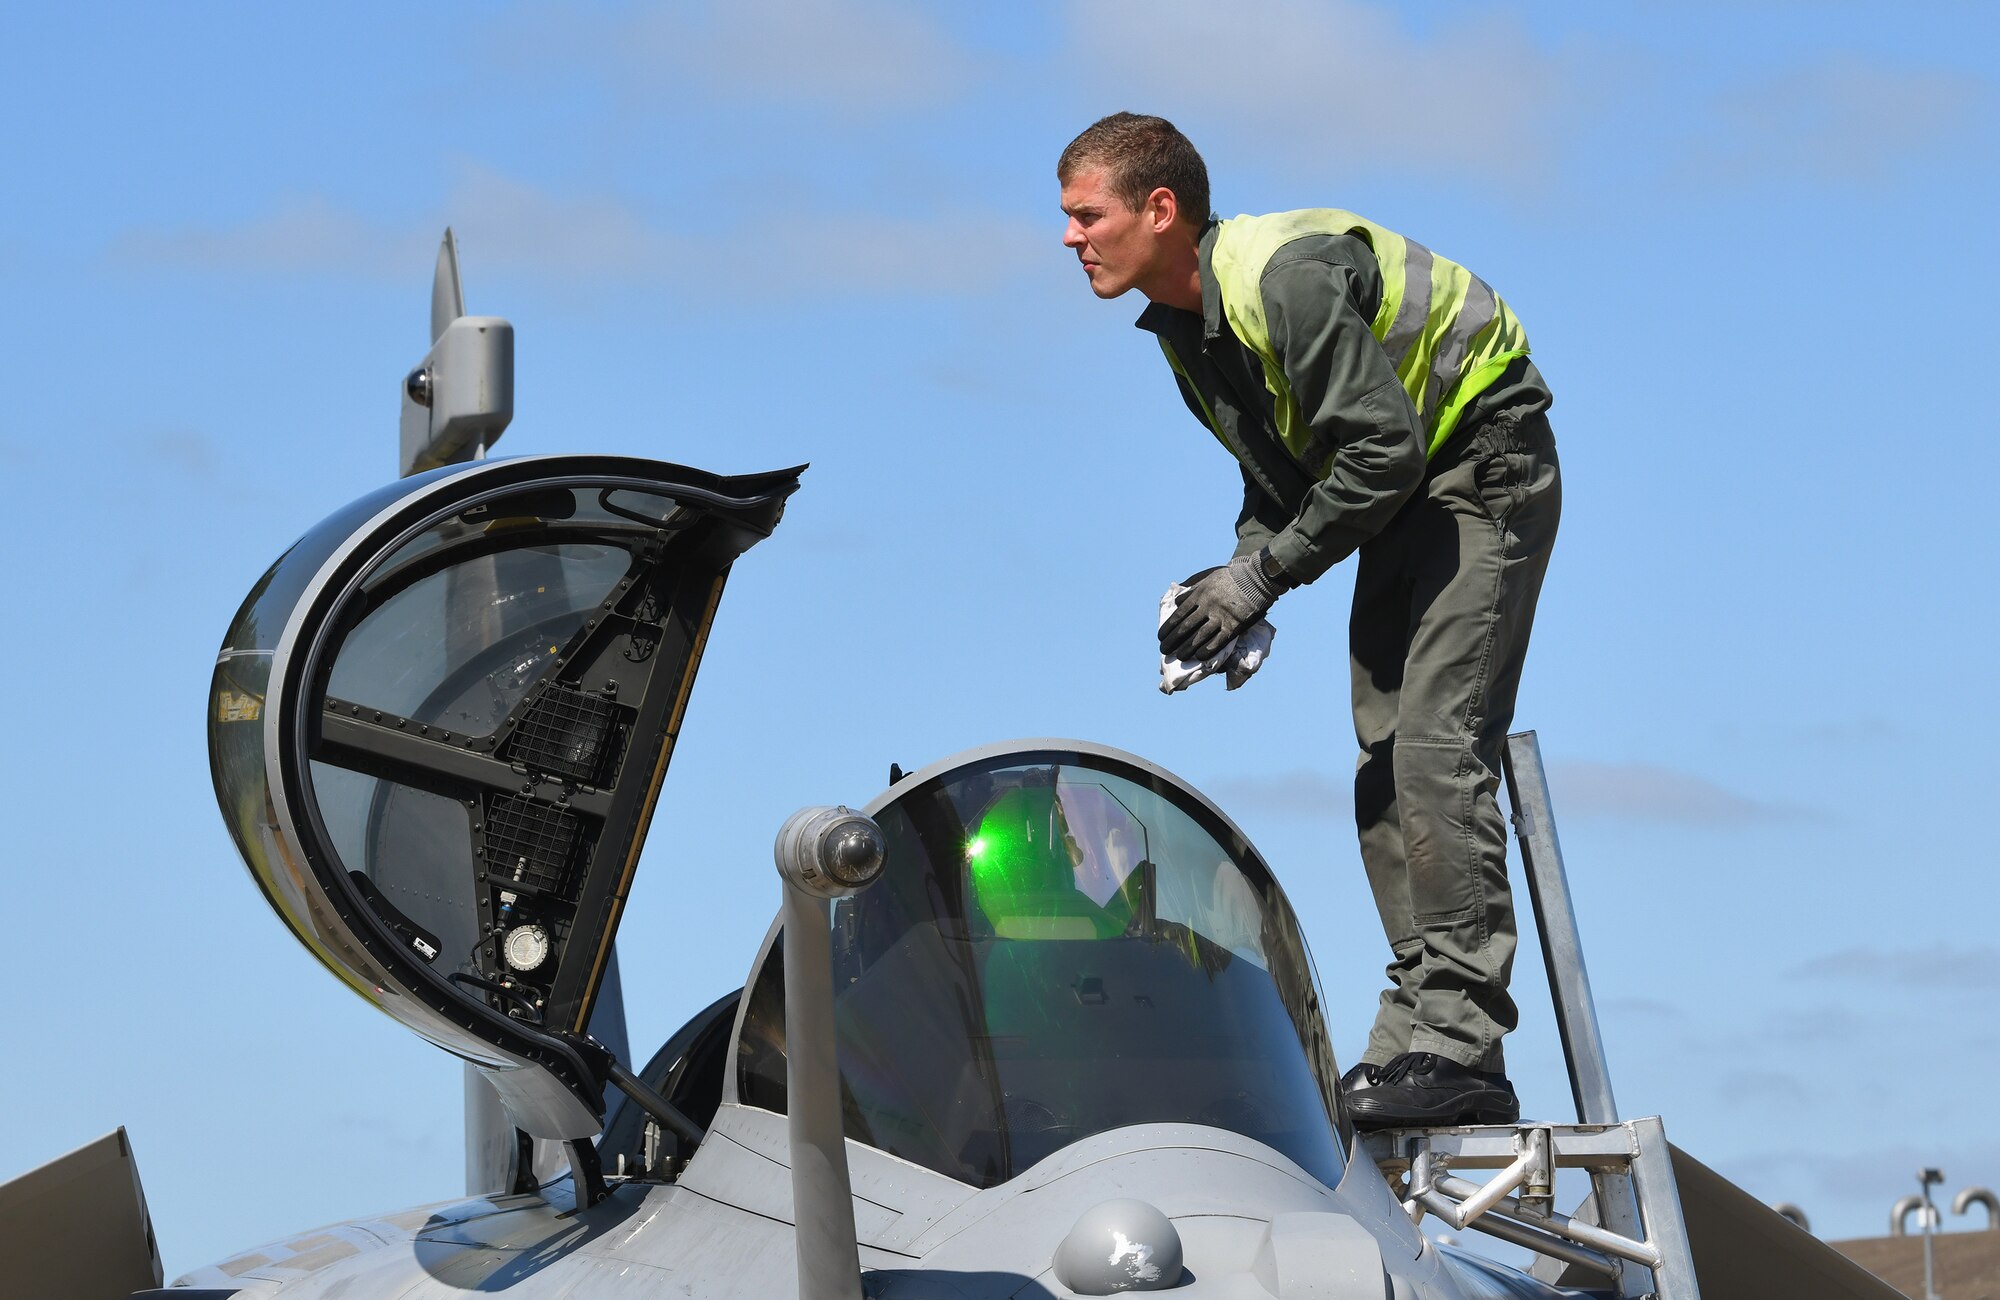 A French Air Force maintainer cleans the windscreen of a Rafale during exercise Point Blank 19-2 at Royal Air Force Lakenheath, England, June 17, 2019. Point Blank is a trilateral exercise focused on fourth and fifth-generation aircraft integration. (U.S. Air Force photo by Staff Sgt. Alex Fox Echols III/Released)